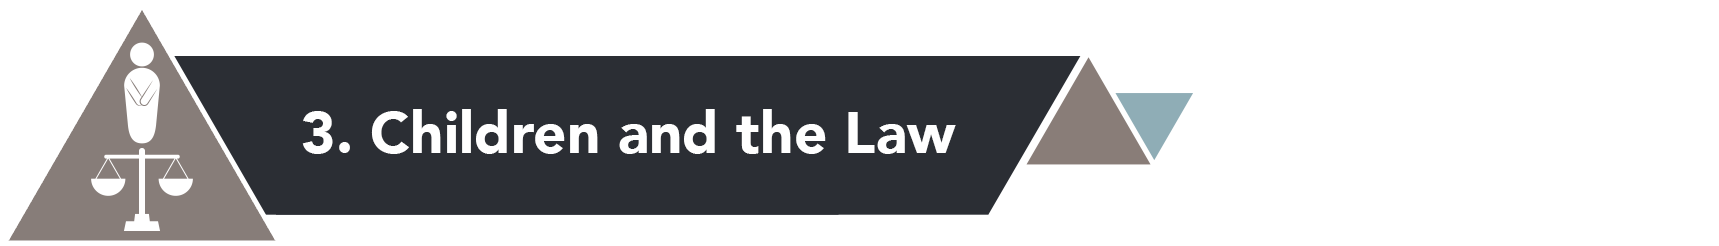 Section 3: Children and the Law